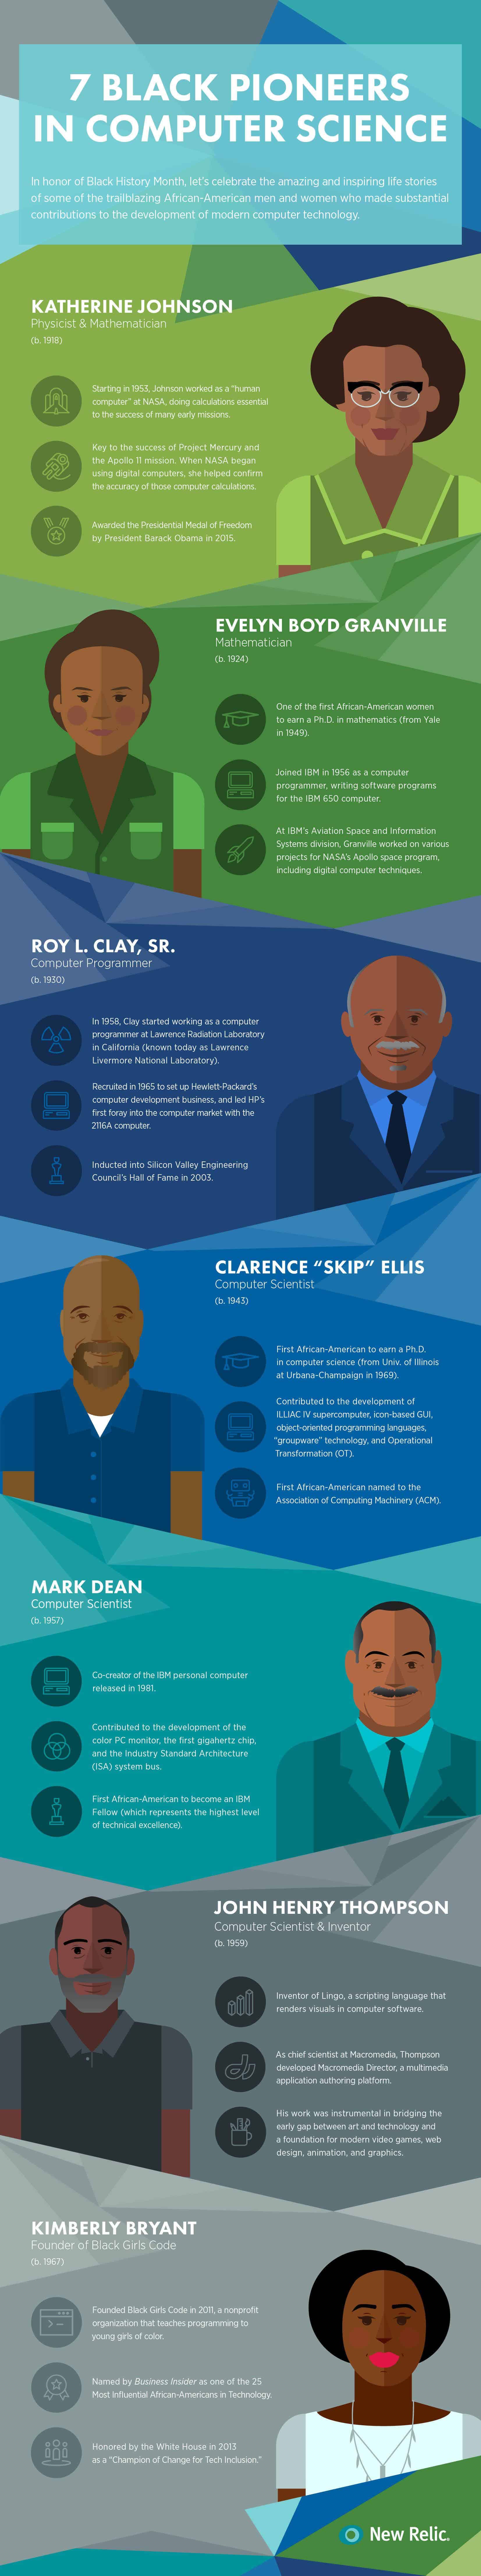 7 Black Pioneers in Computer Science Infographic